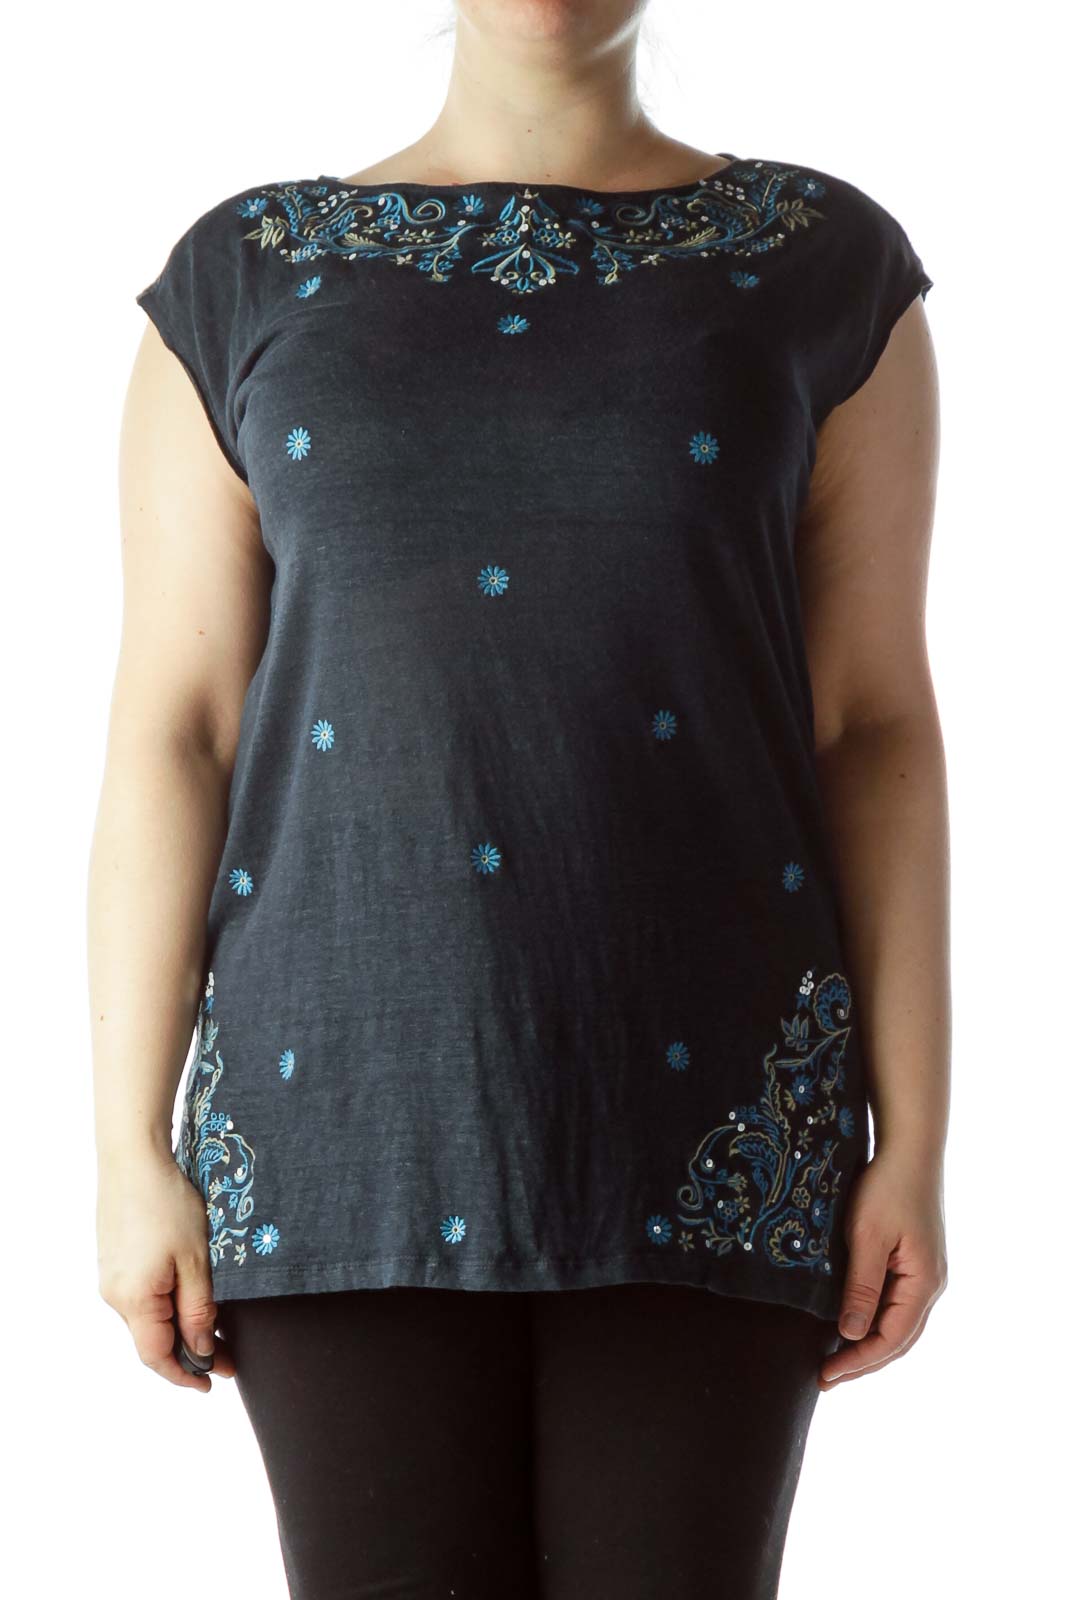 Blue Floral Embroidered 100% Linen Knit Top Front